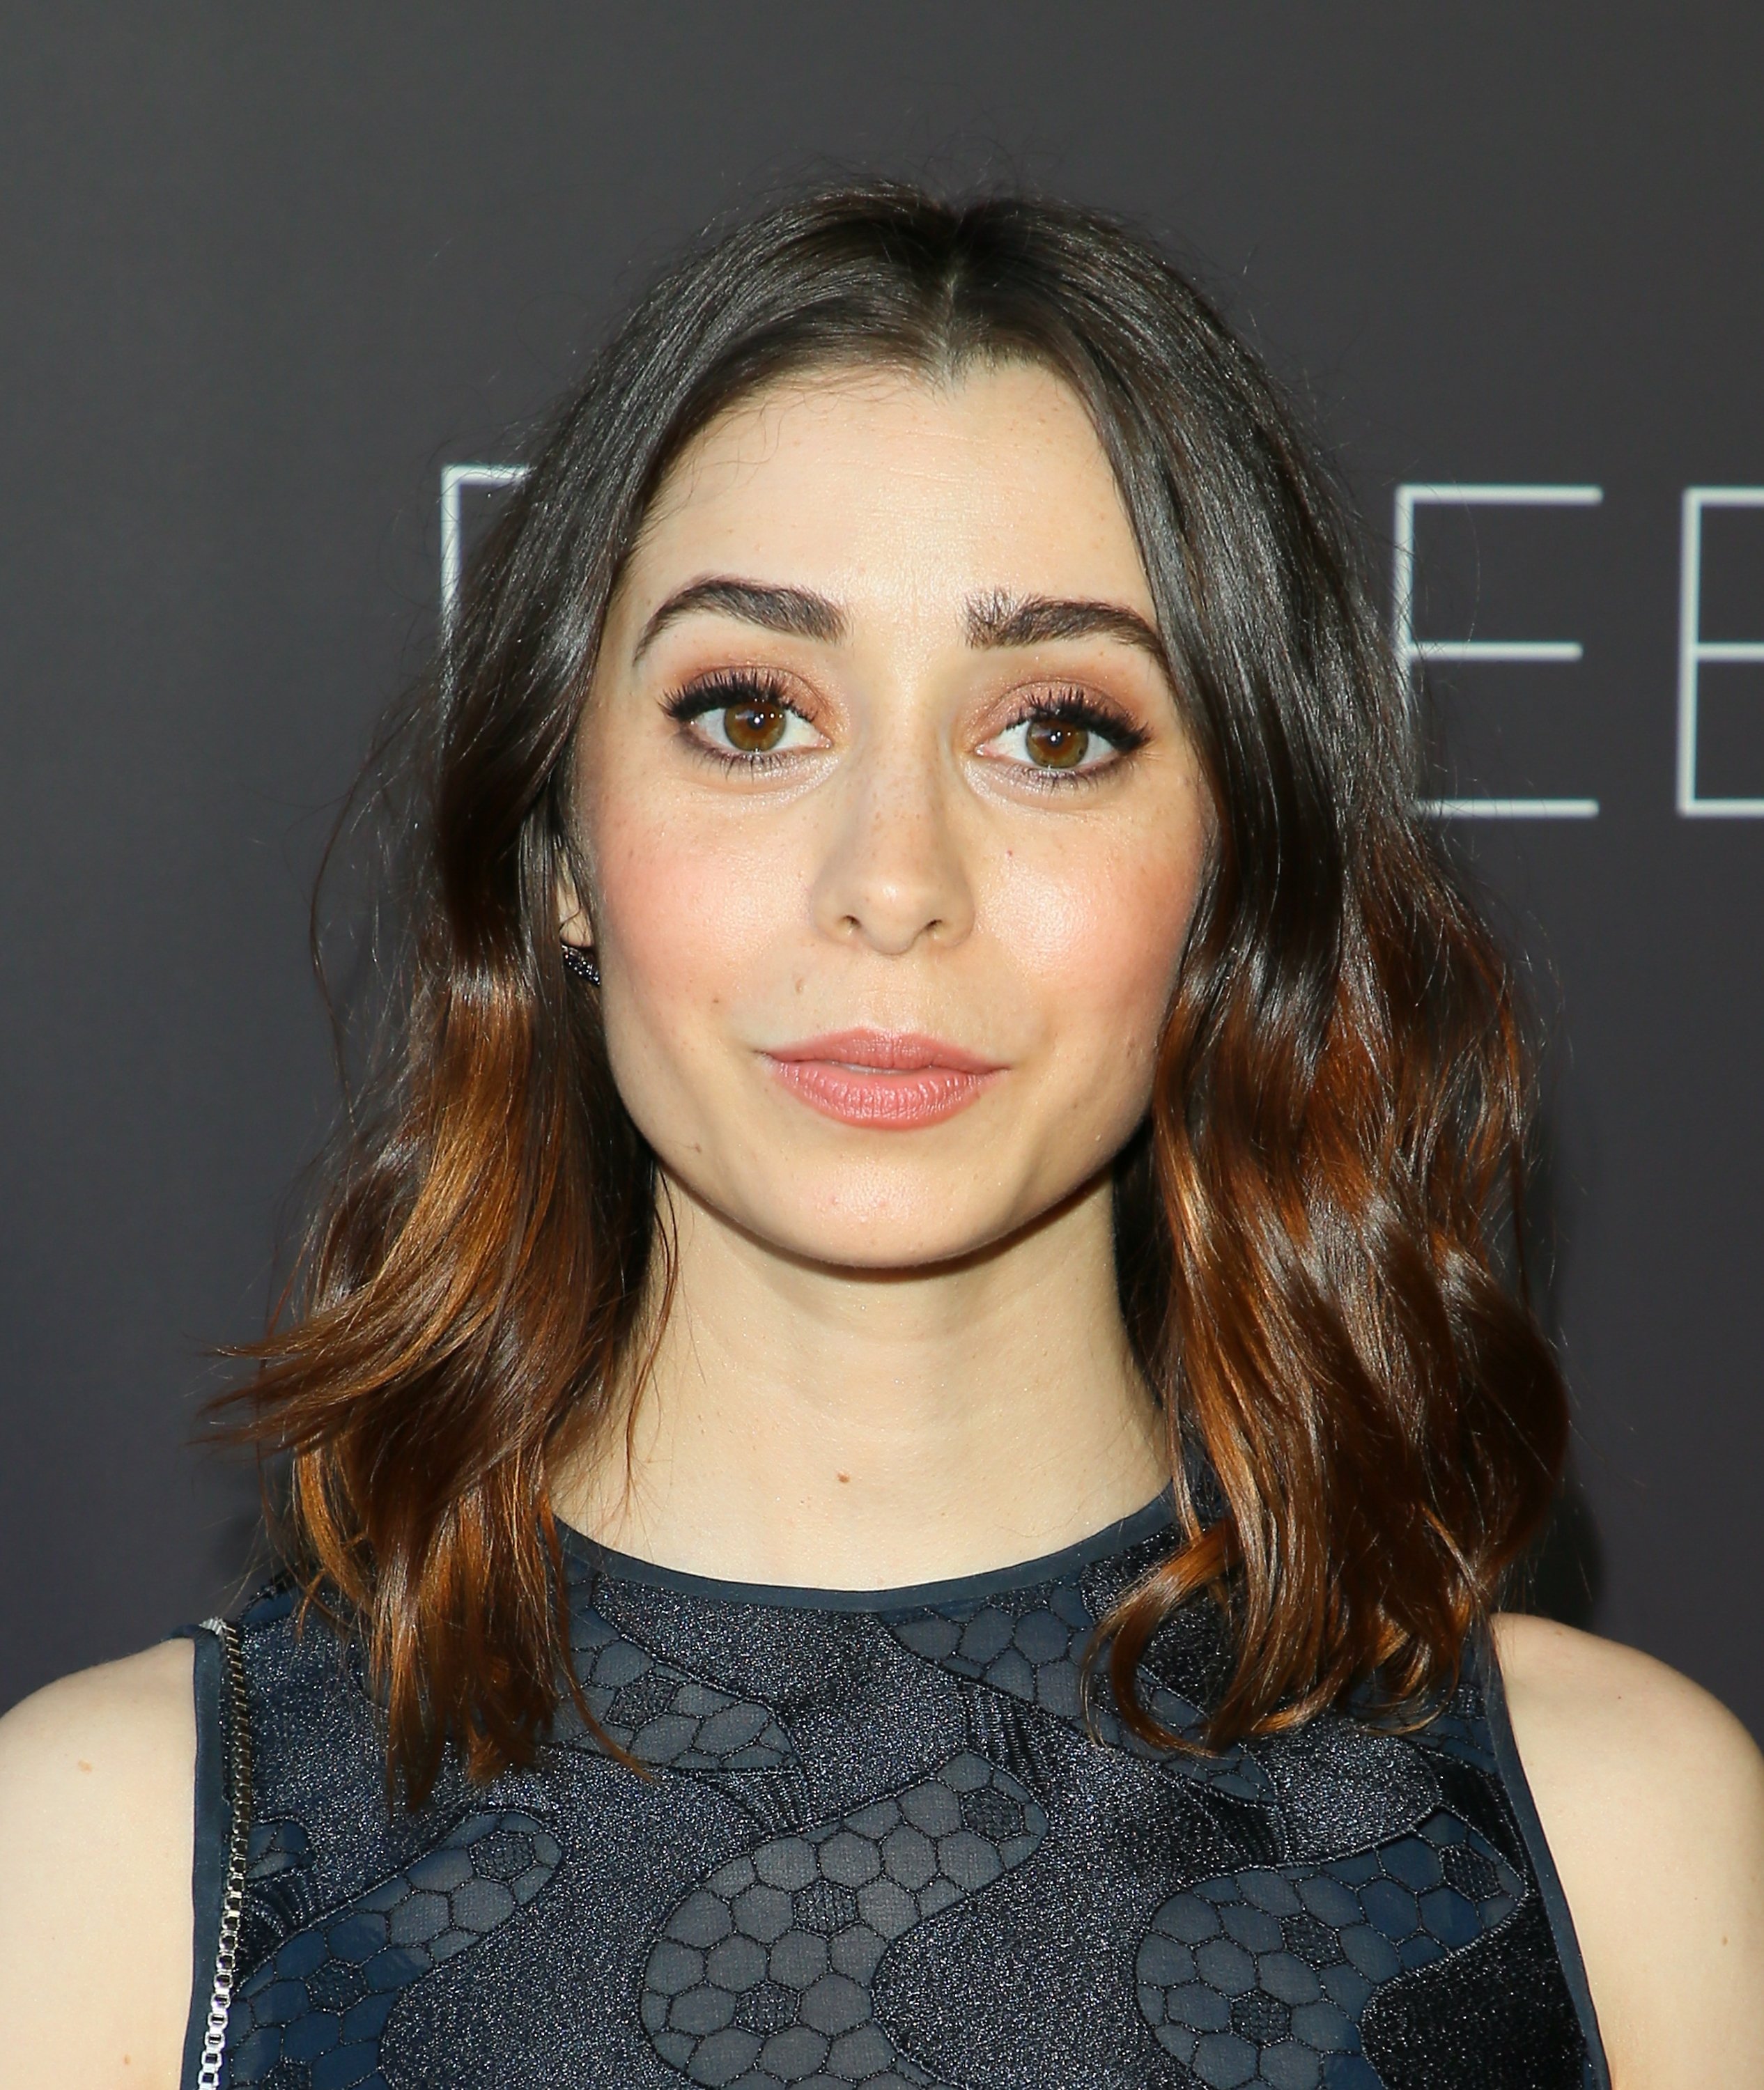 Cristin Milioti at the FYSEE event for Netflix's 'Black Mirror' held at Netflix FYSEE at Raleigh Studios on June 6, 2018 in Los Angeles, California. | Source: Getty Images